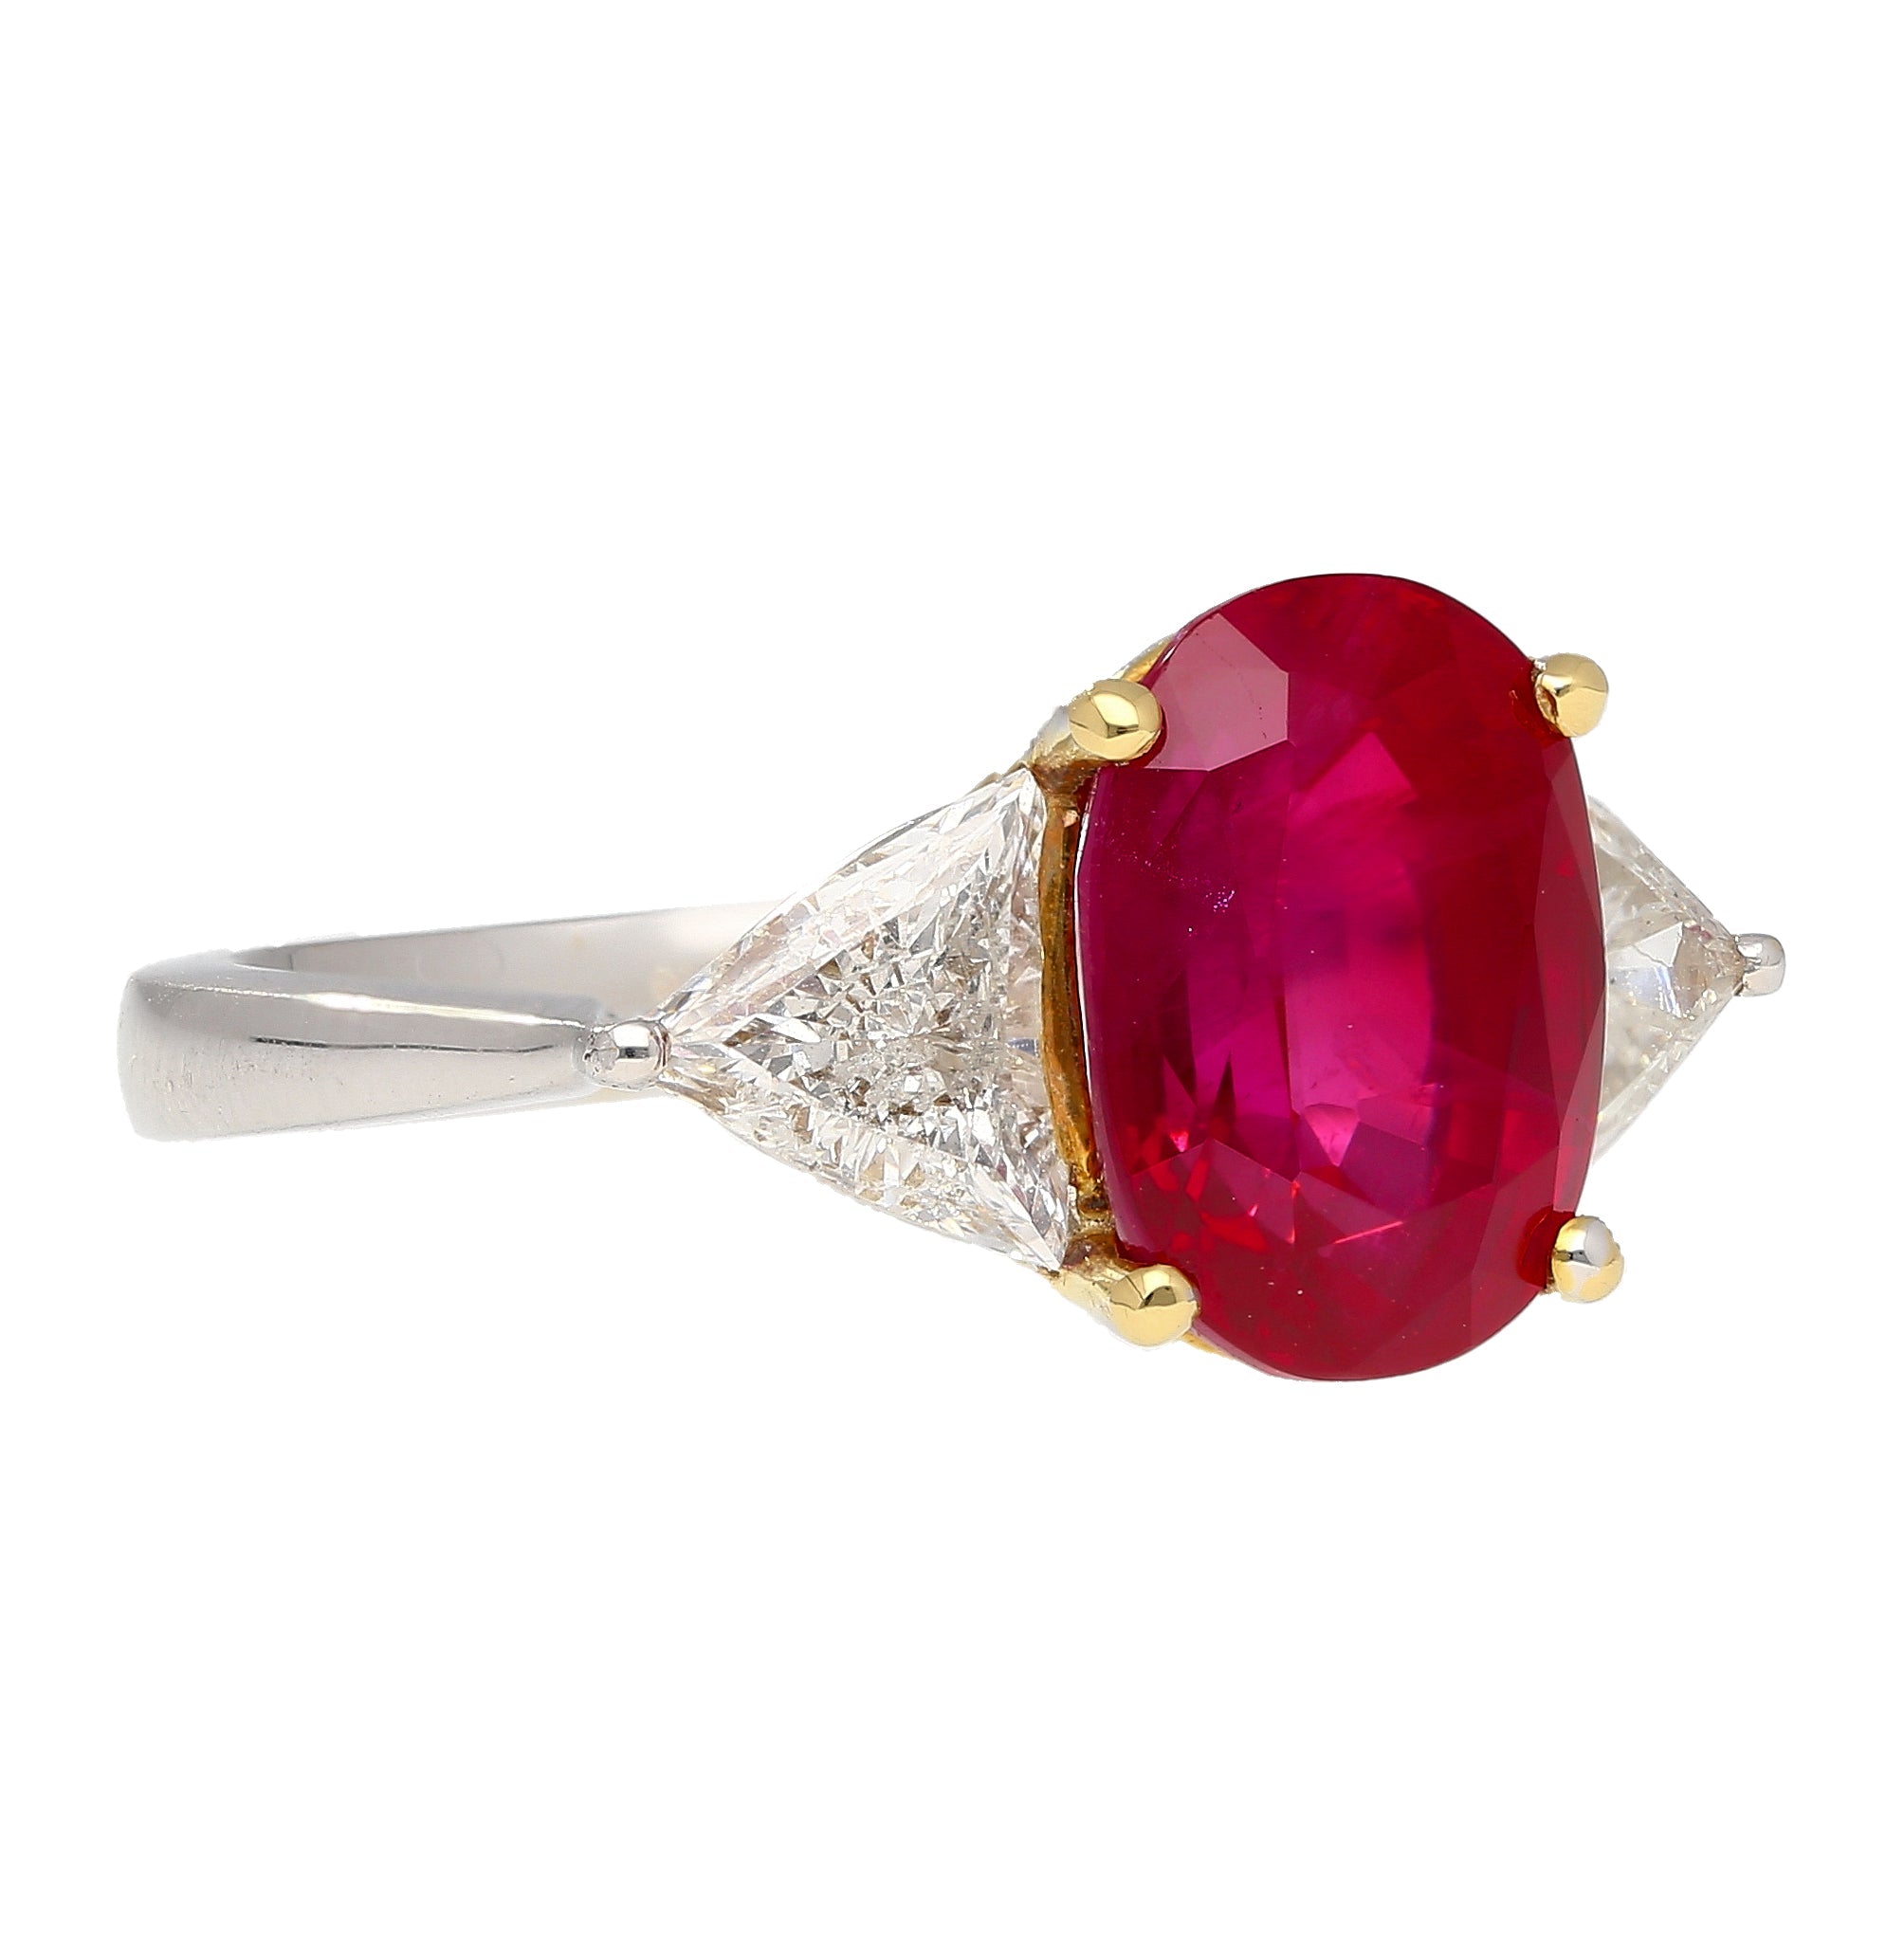 Gubelin-Certified-4_47-Oval-Cut-Ruby-with-Trillion-Cut-Diamond-Sides-in-18K-White-Gold-Ring-Rings-2.jpg